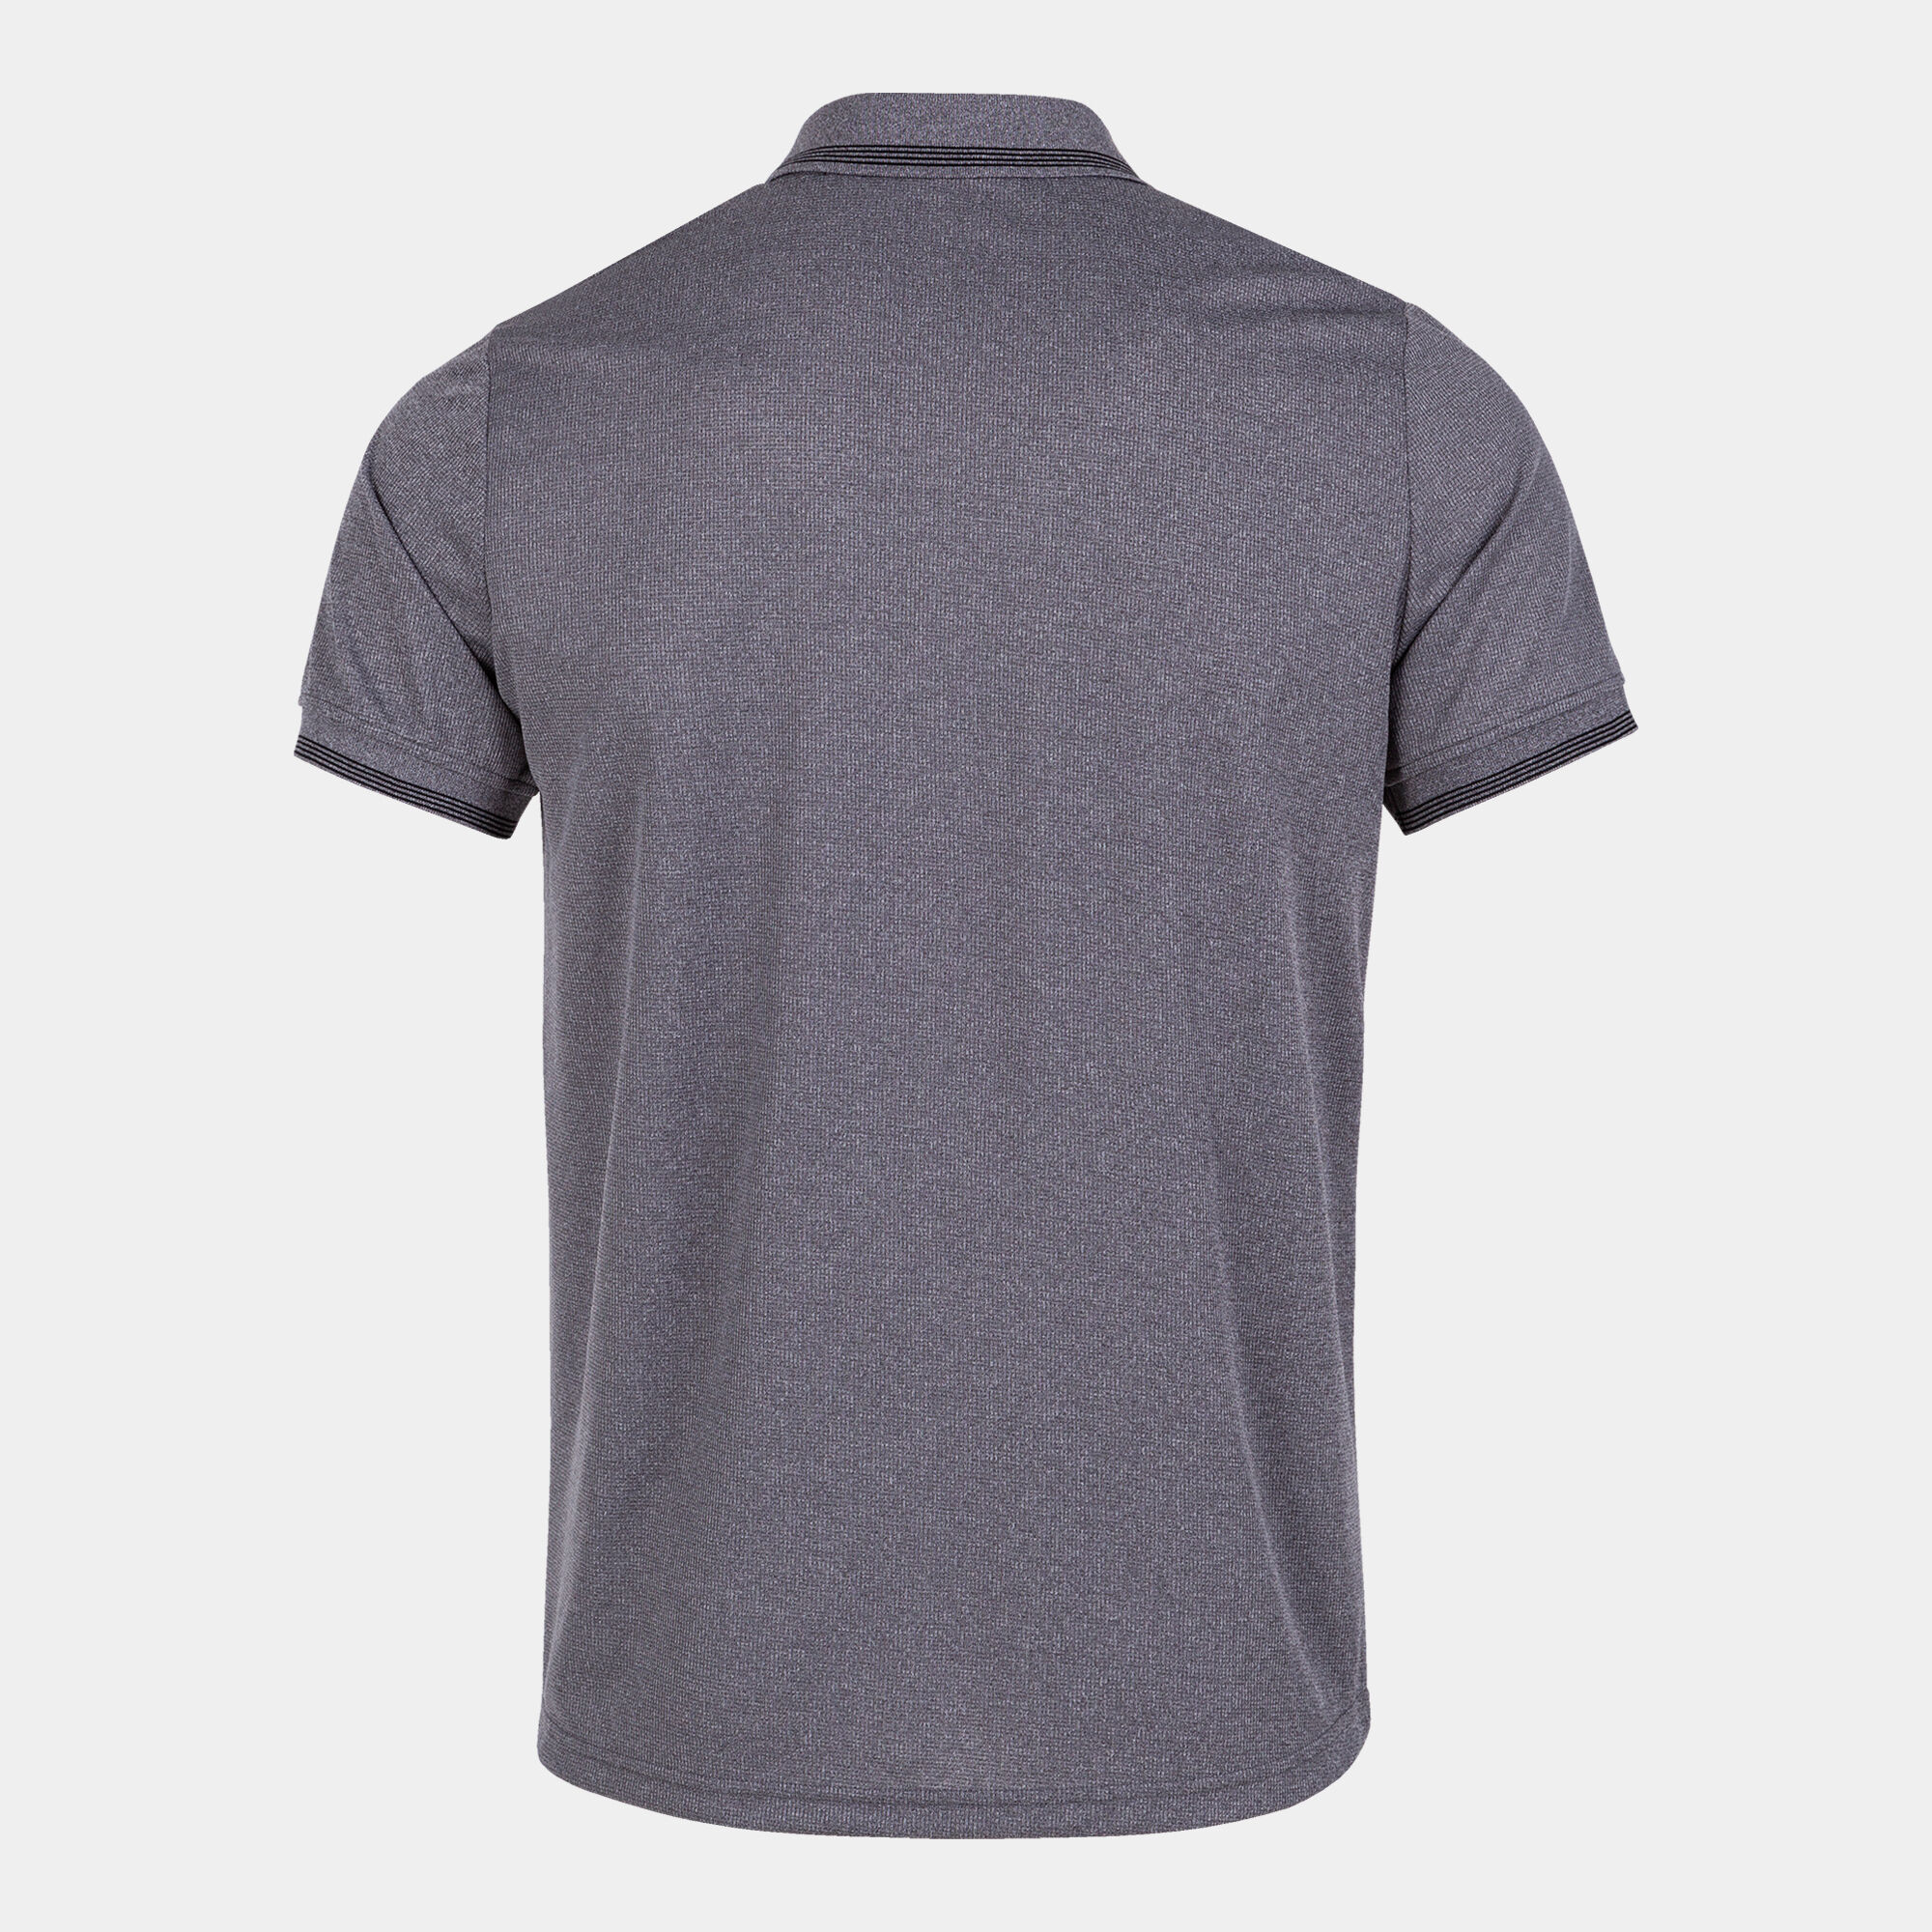 POLO MANCHES COURTES HOMME CAMPUS III GRIS MELANGE